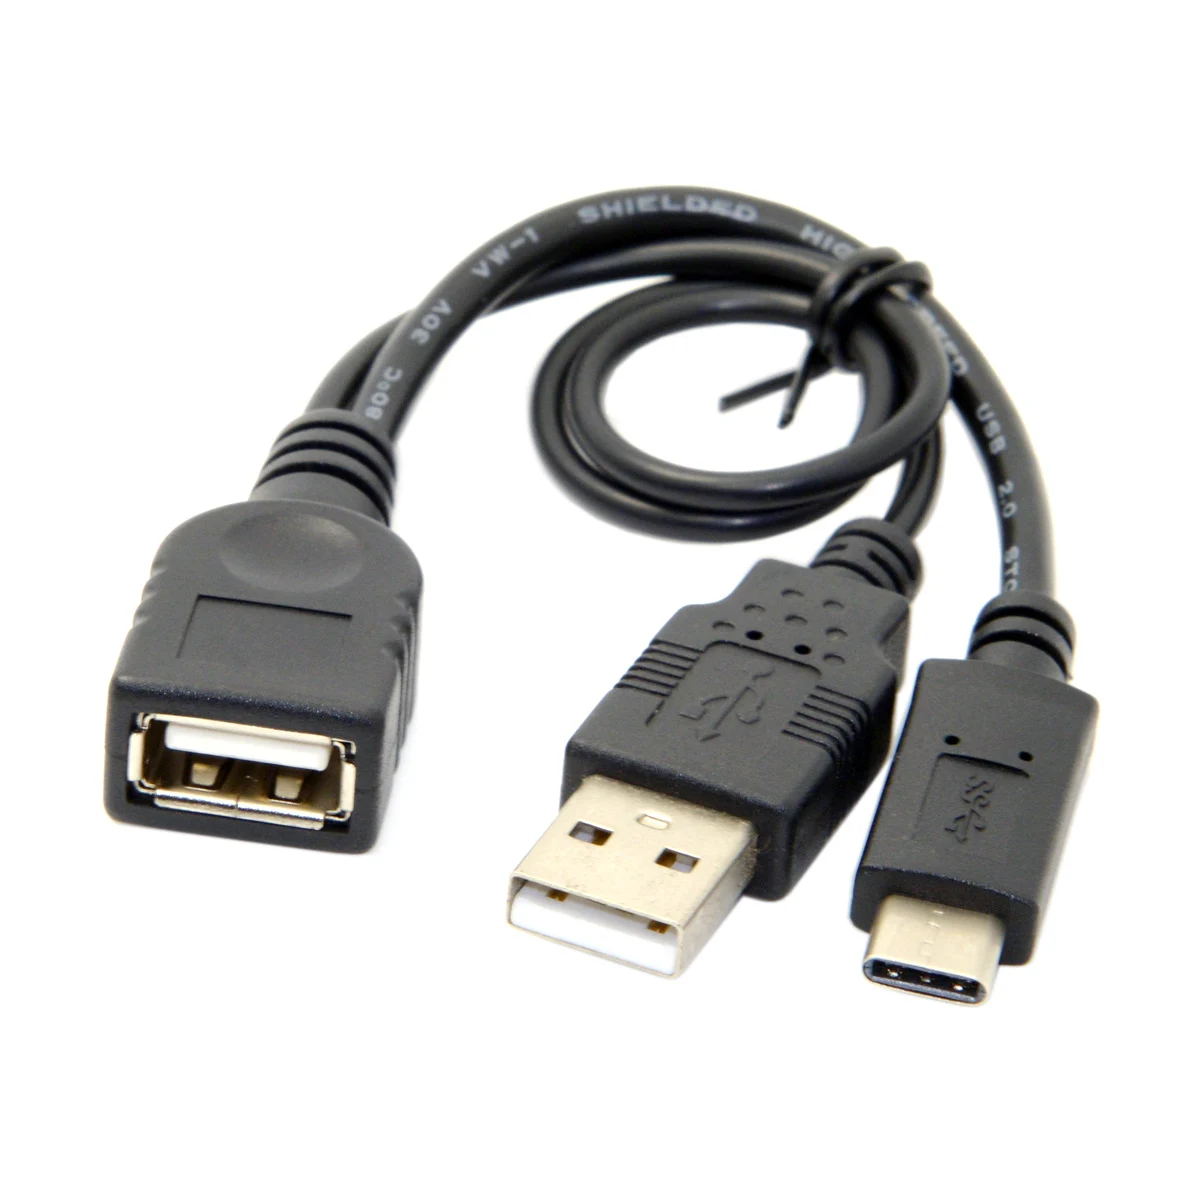 

Type-C USB 3.1 USB-C to USB 2.0 Female OTG Data Power Cable for Cell Phone & Tablet & Lap top & Mac book Pro & Hard Disk Drive